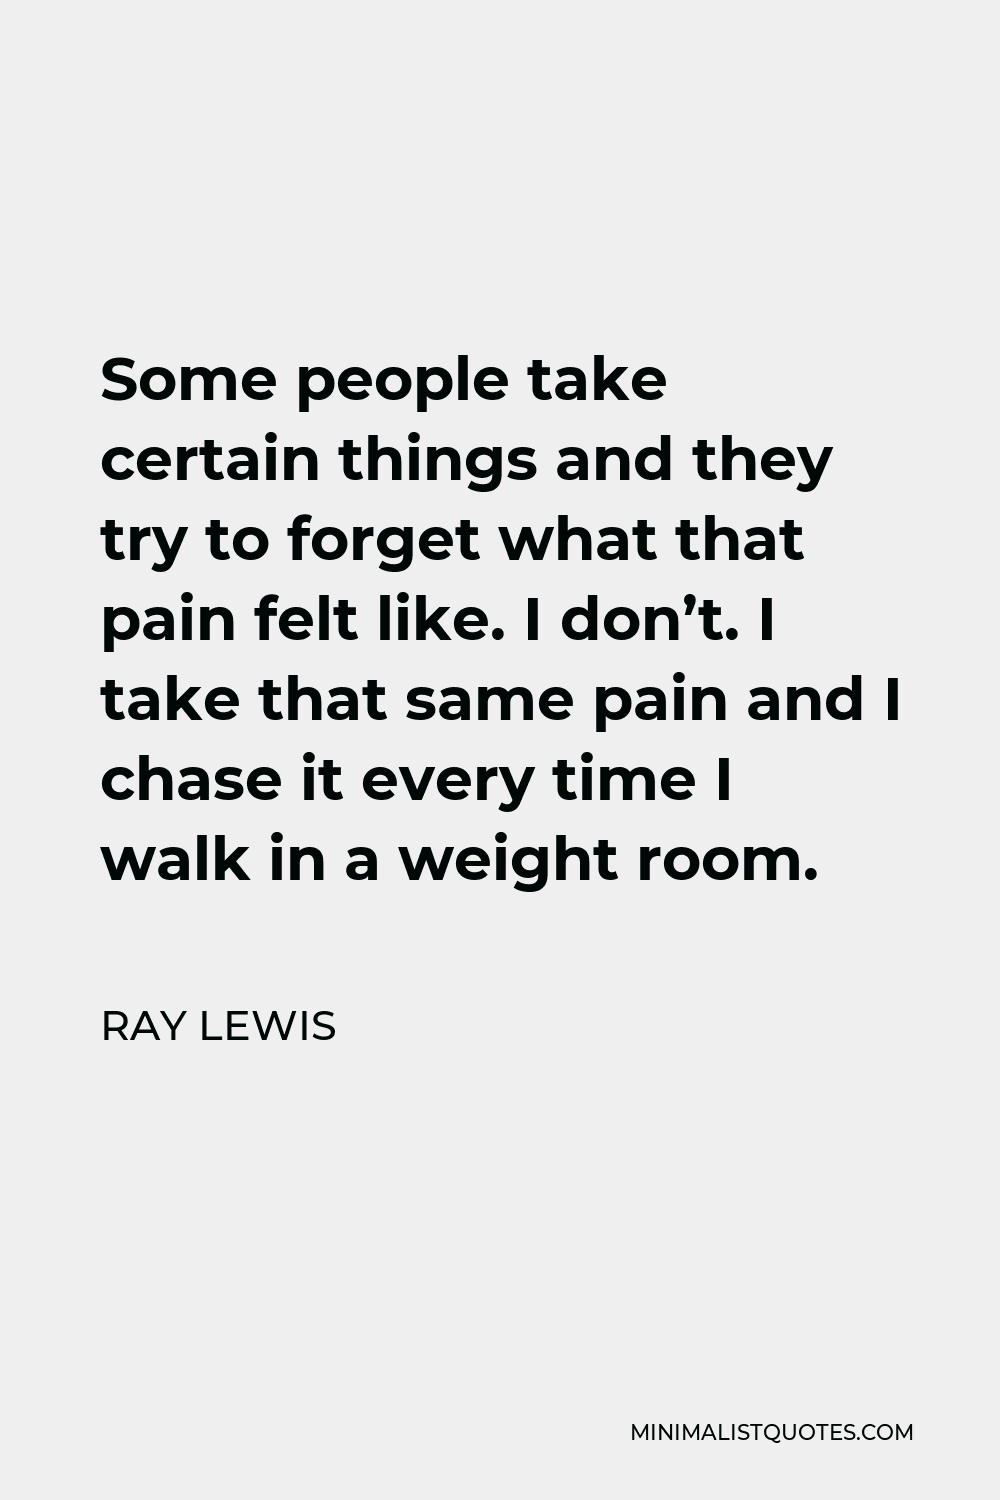 Ray Lewis Quote - Some people take certain things and they try to forget what that pain felt like. I don’t. I take that same pain and I chase it every time I walk in a weight room.